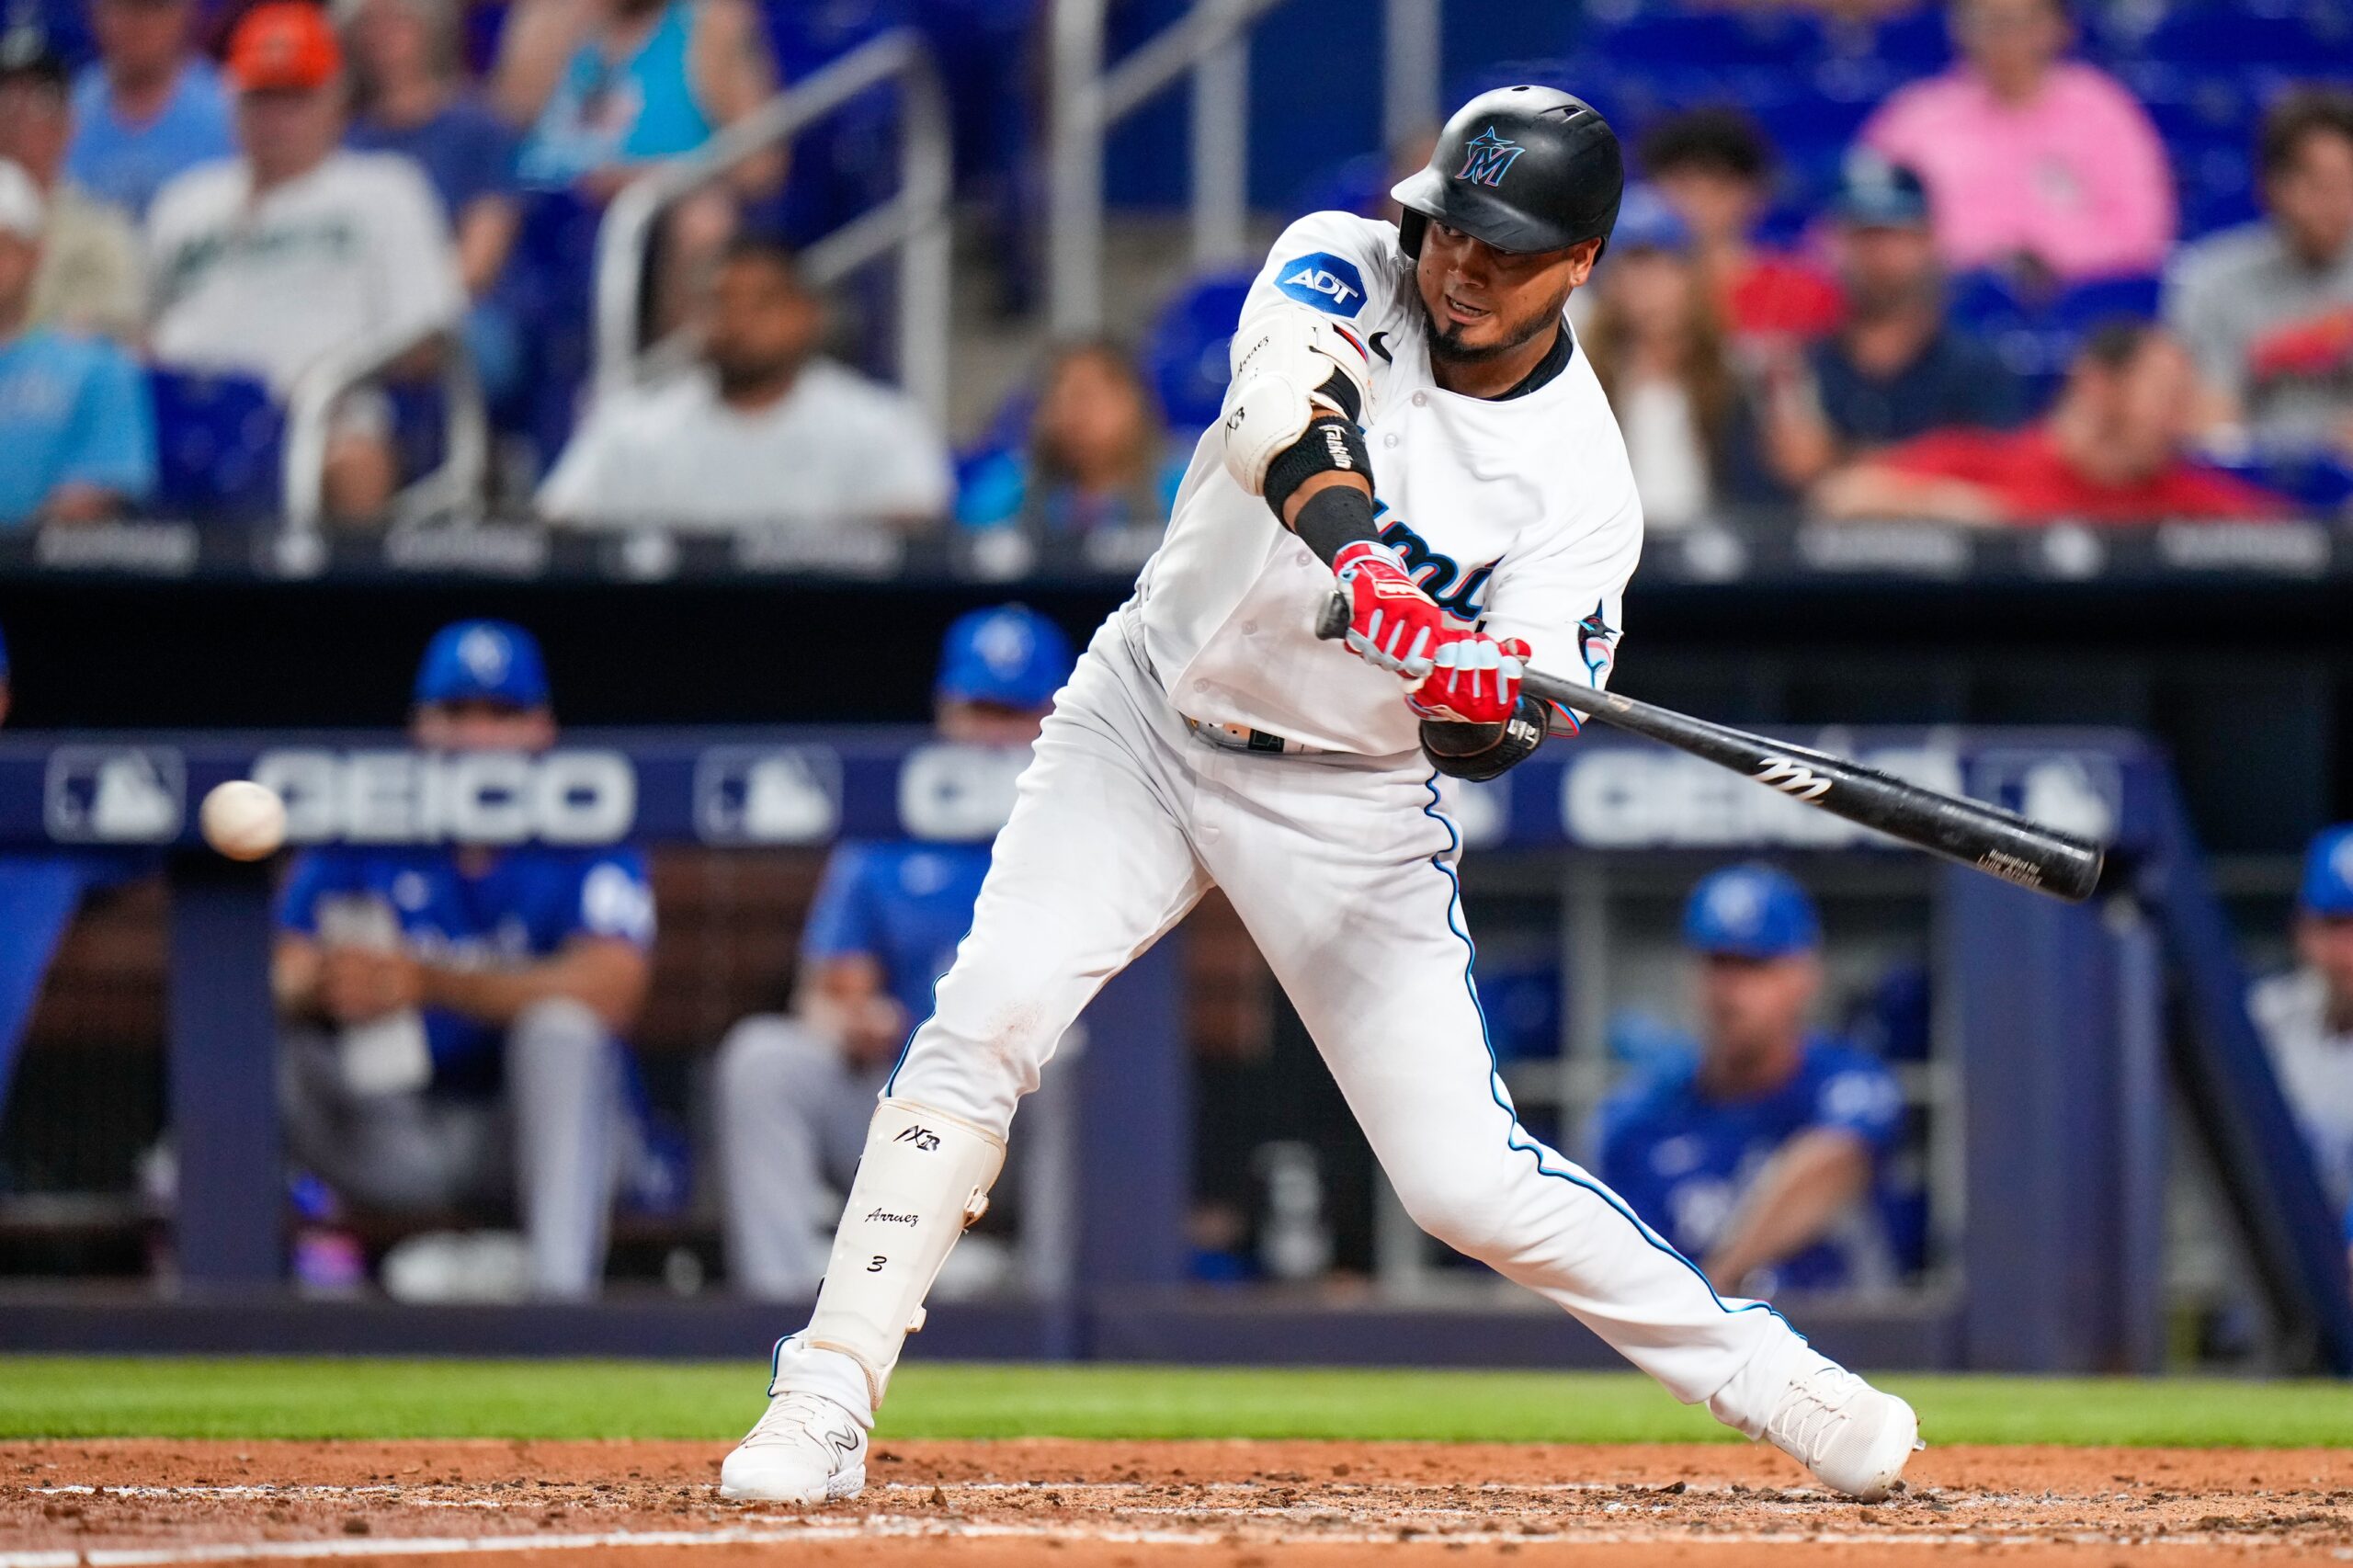 Could shortened 2020 MLB season see a chase for .400 batting average?